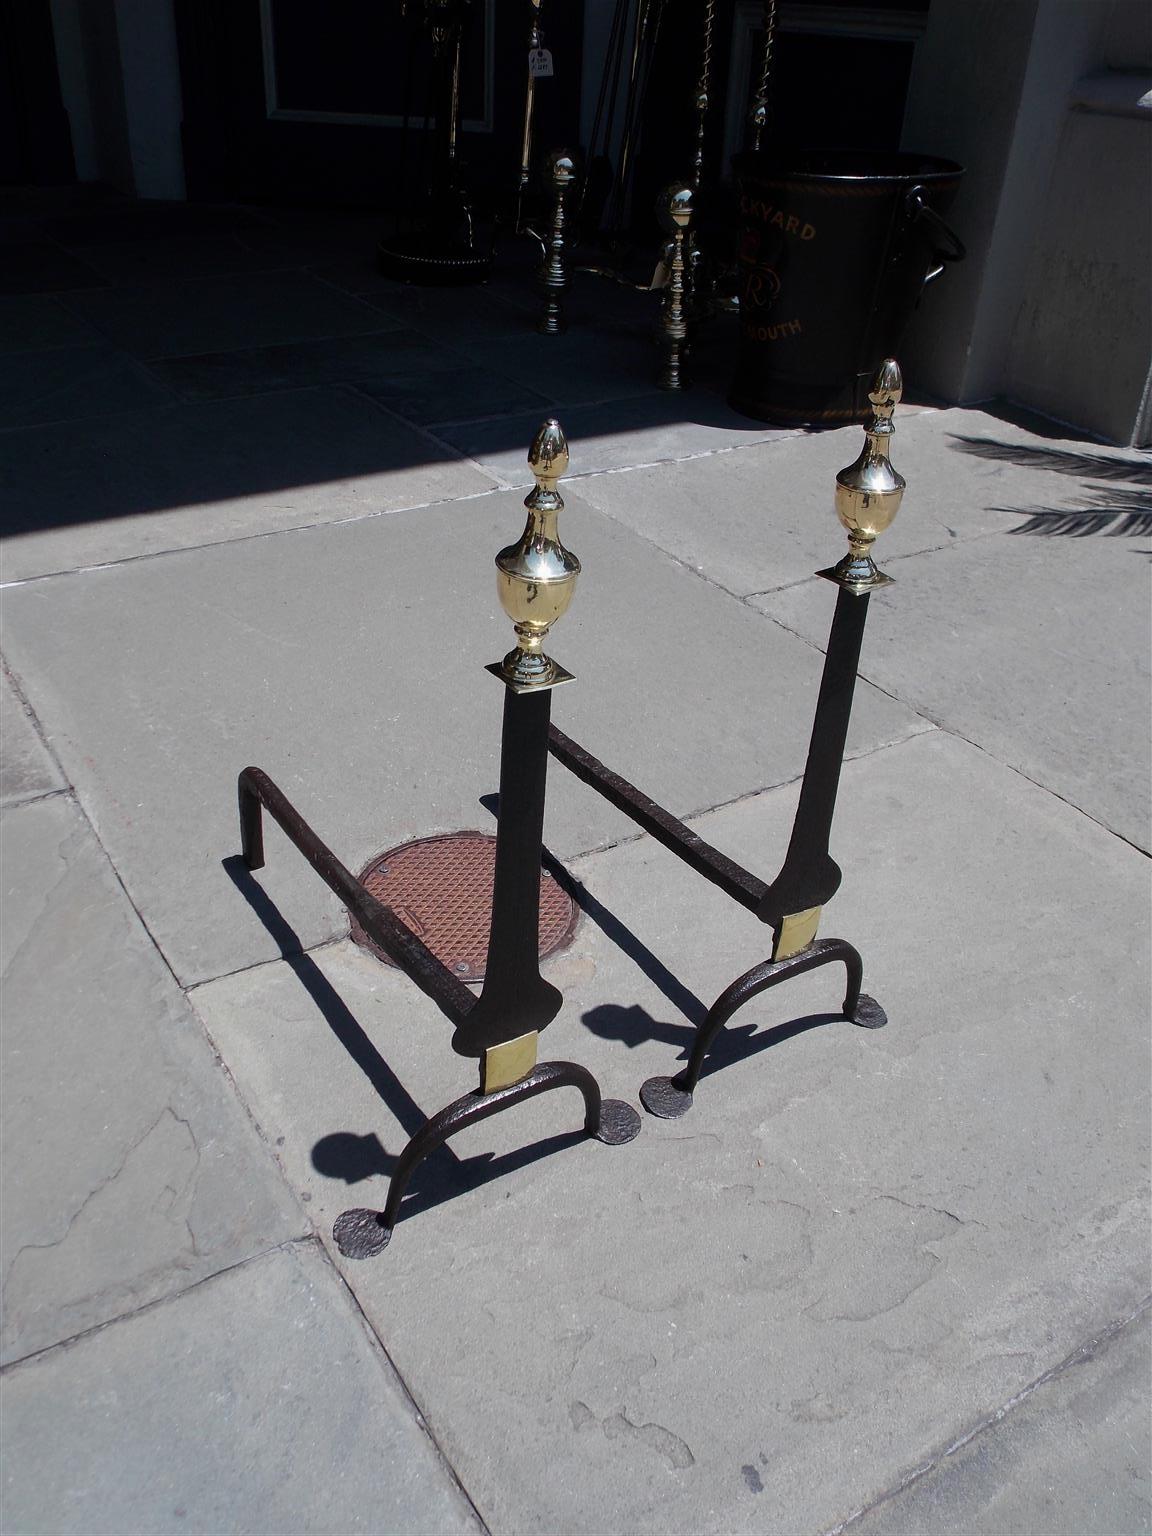 American wrought iron and cast brass flanking urn finial knife blade andirons with scrolled legs and penny feet. The bulbous iron plinth is more vigorous and bolder than most with an additional decorative brass shied to cover blacksmiths joint